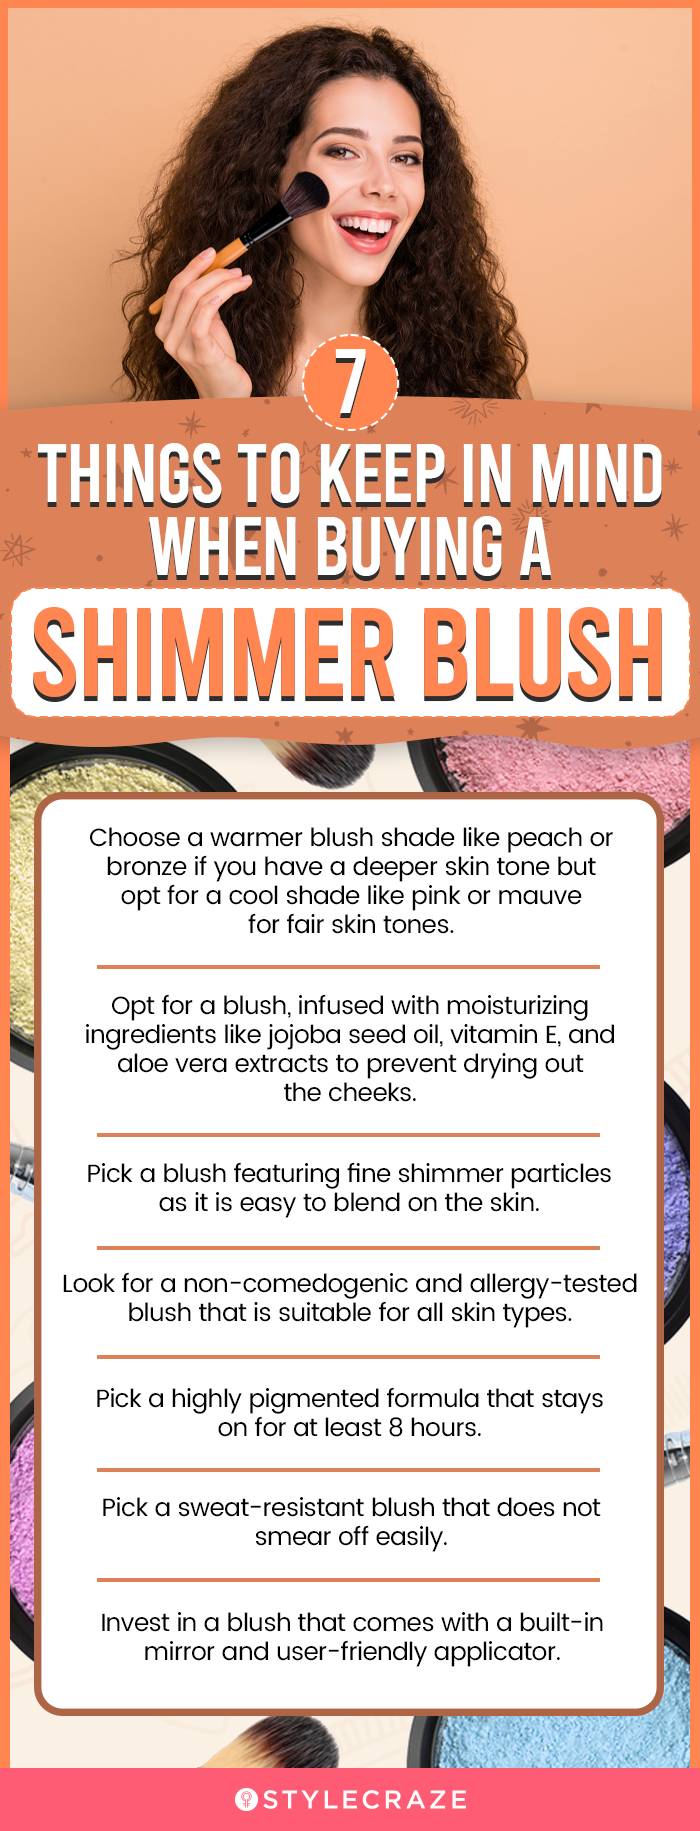 7 Things To Keep In Mind When Buying A Shimmer Blush (infographic)